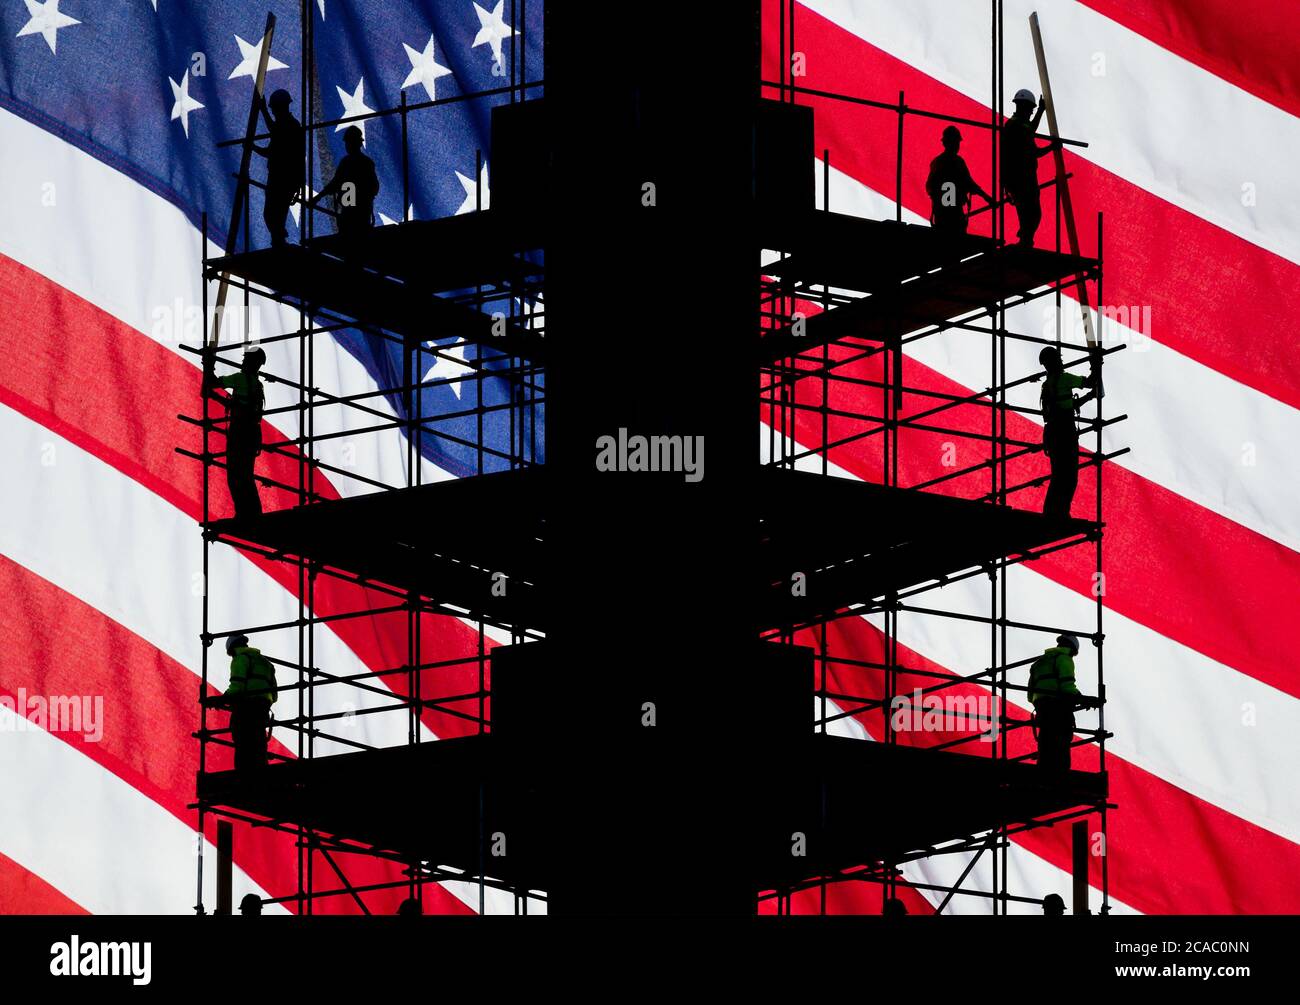 Construction workers on scaffolding with Stars and Stripes flag as backdrop. Concept image: USA, American economy, blue collar worker... Stock Photo